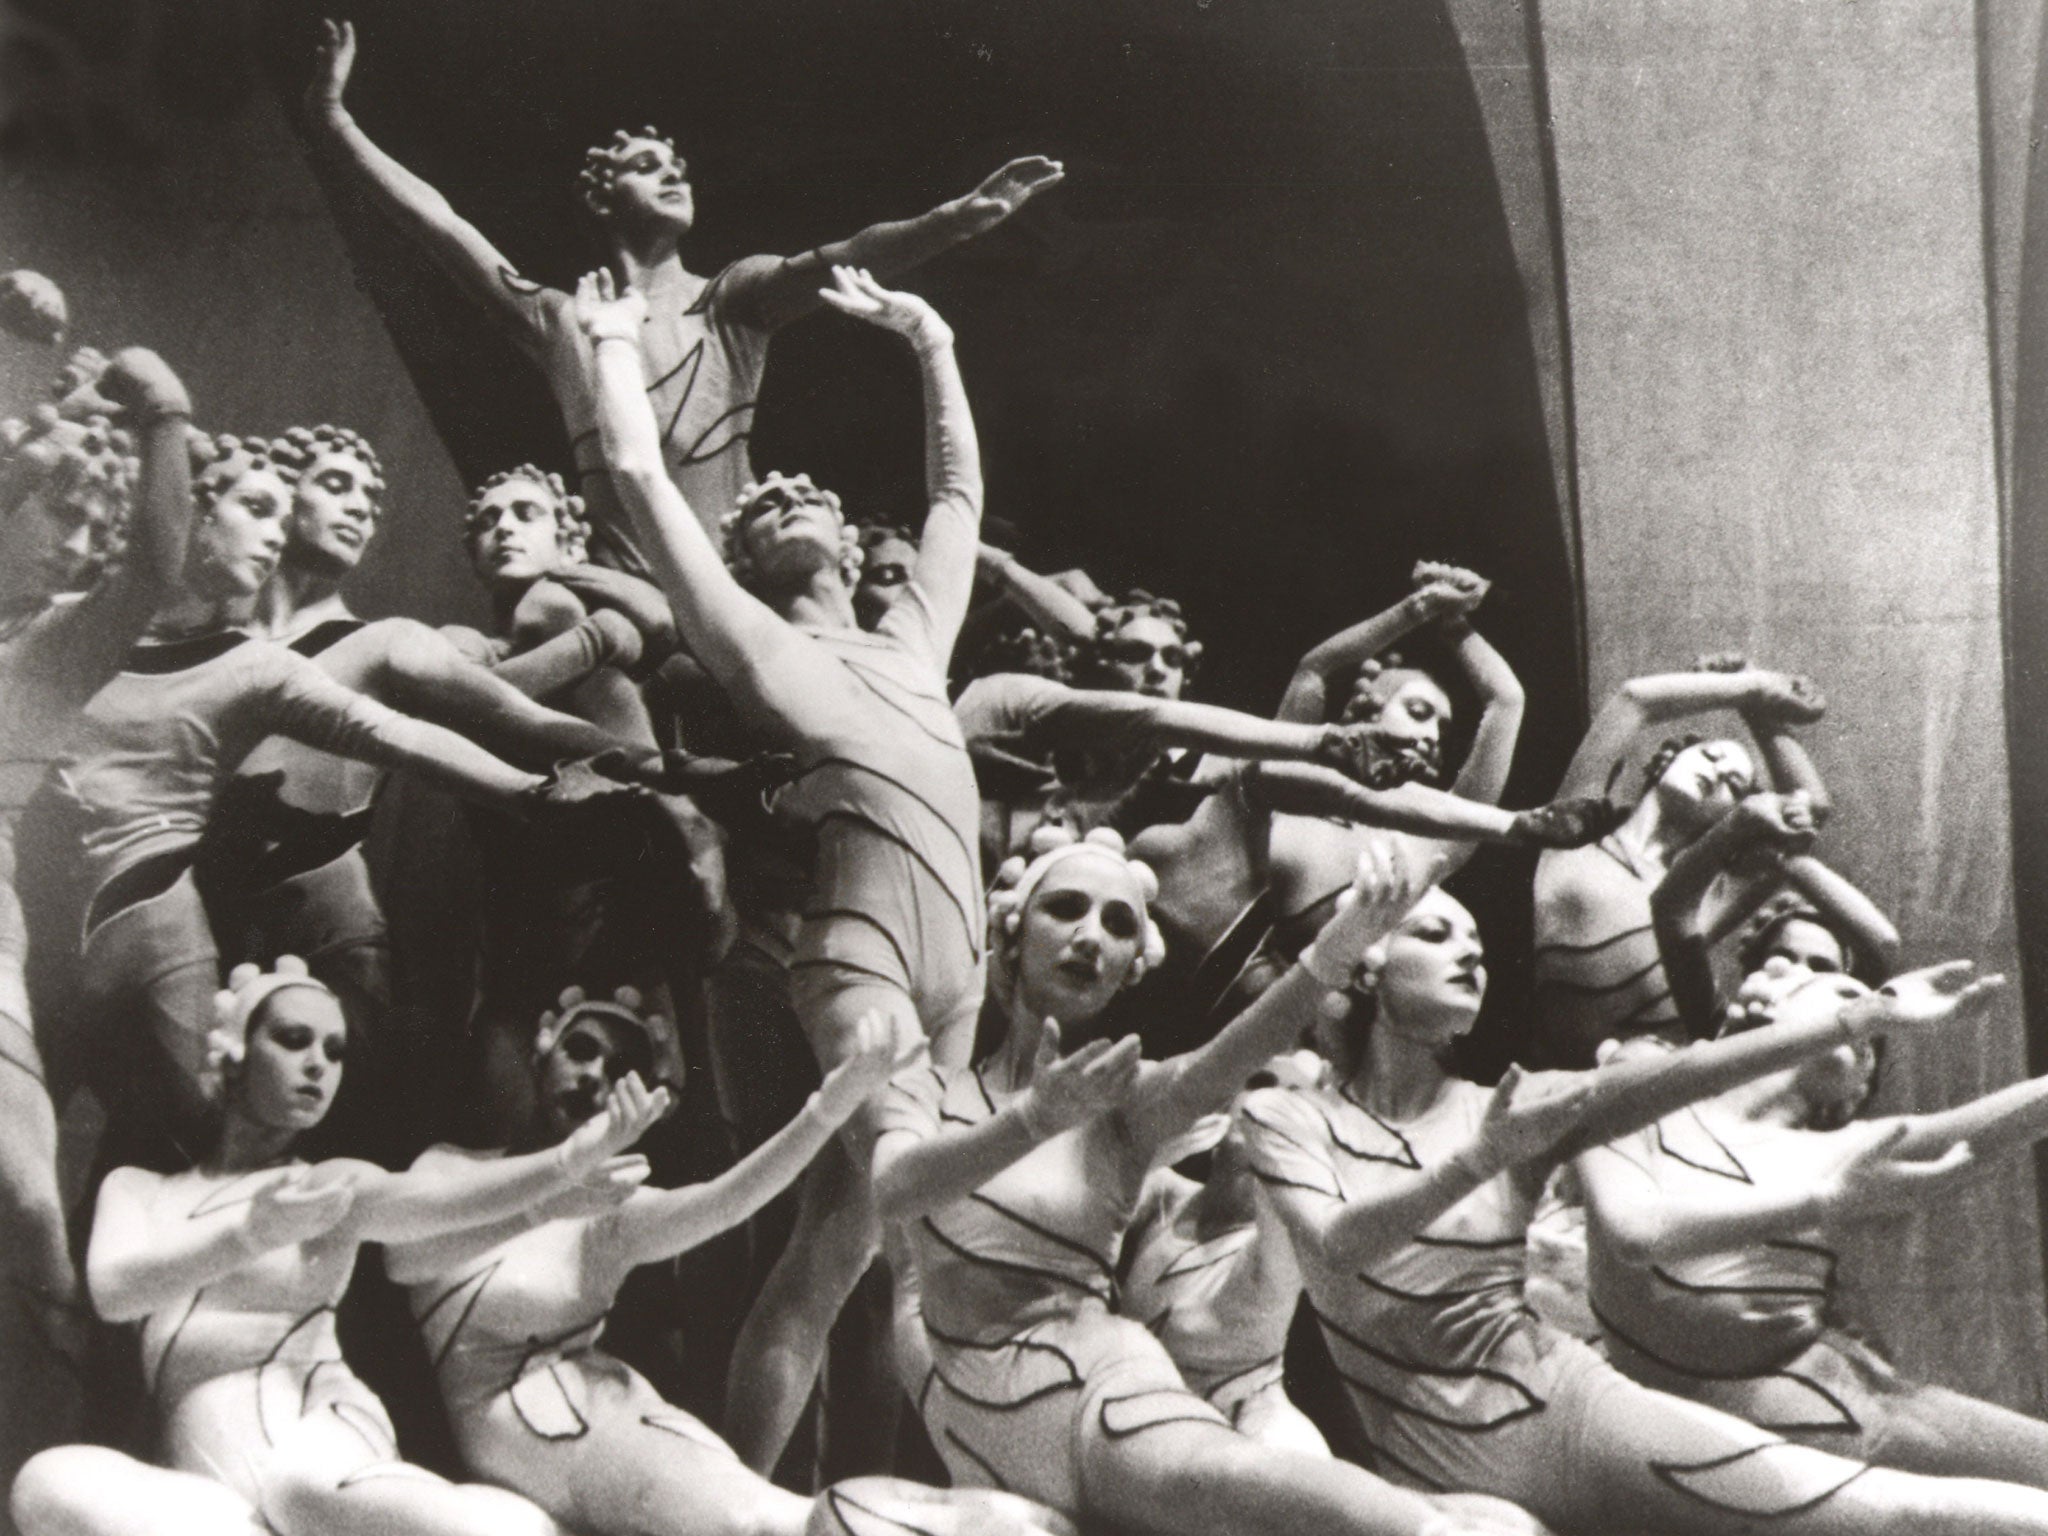 Frederic Franklin: Dancer who championed modern ballet in the US